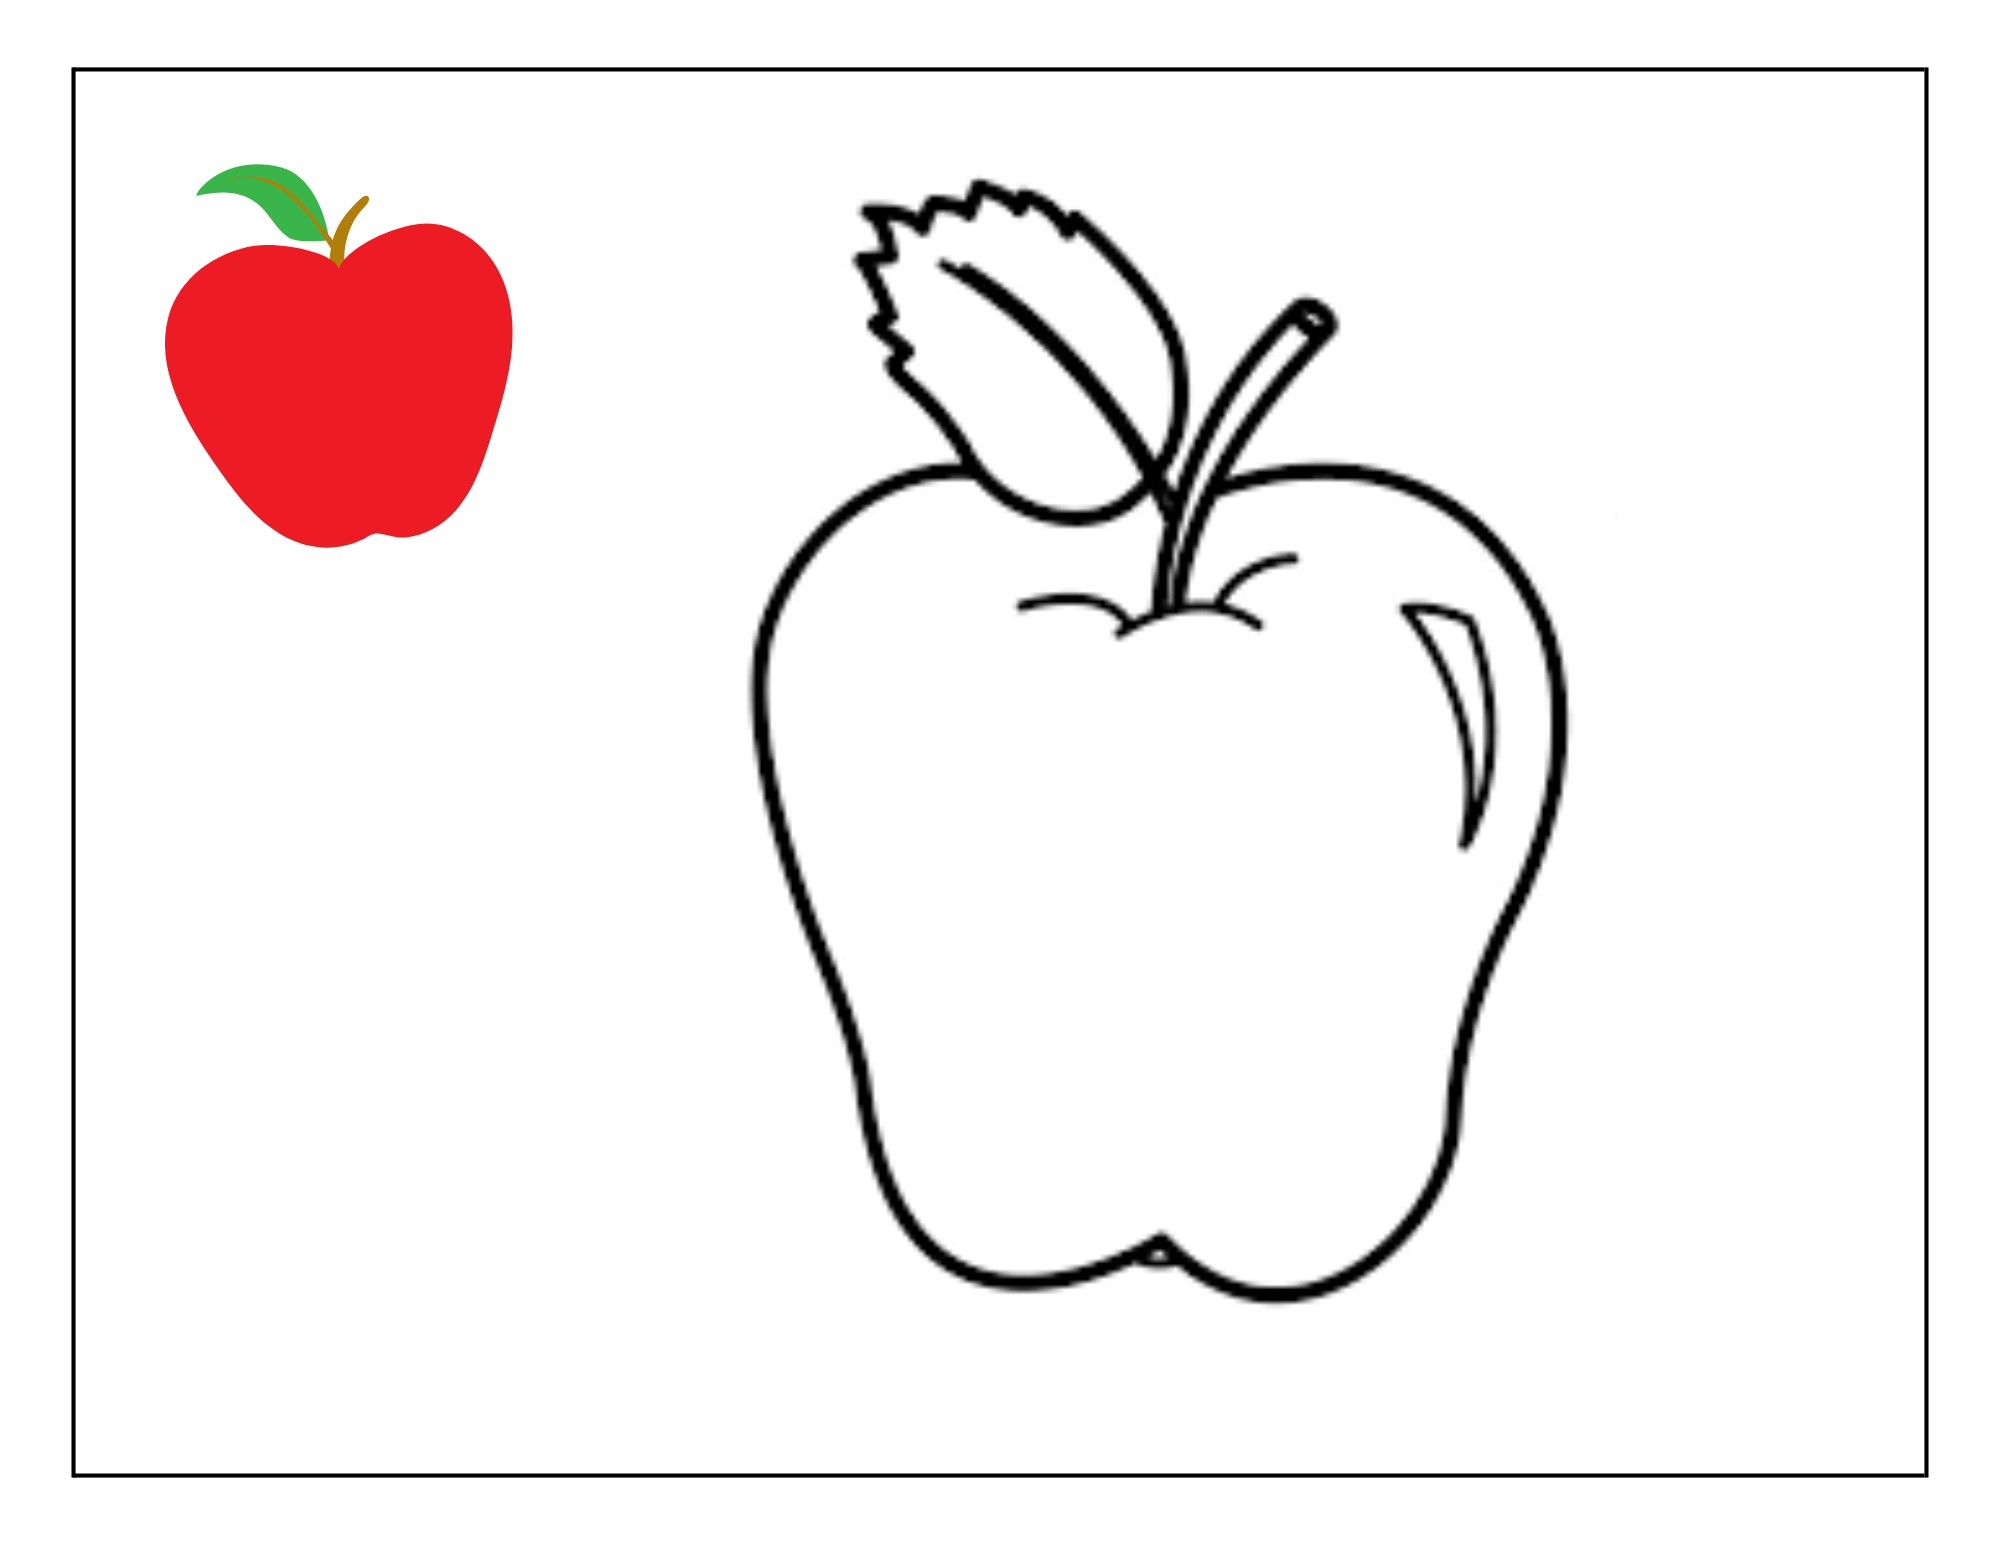 Fruit coloring pages for toddlers